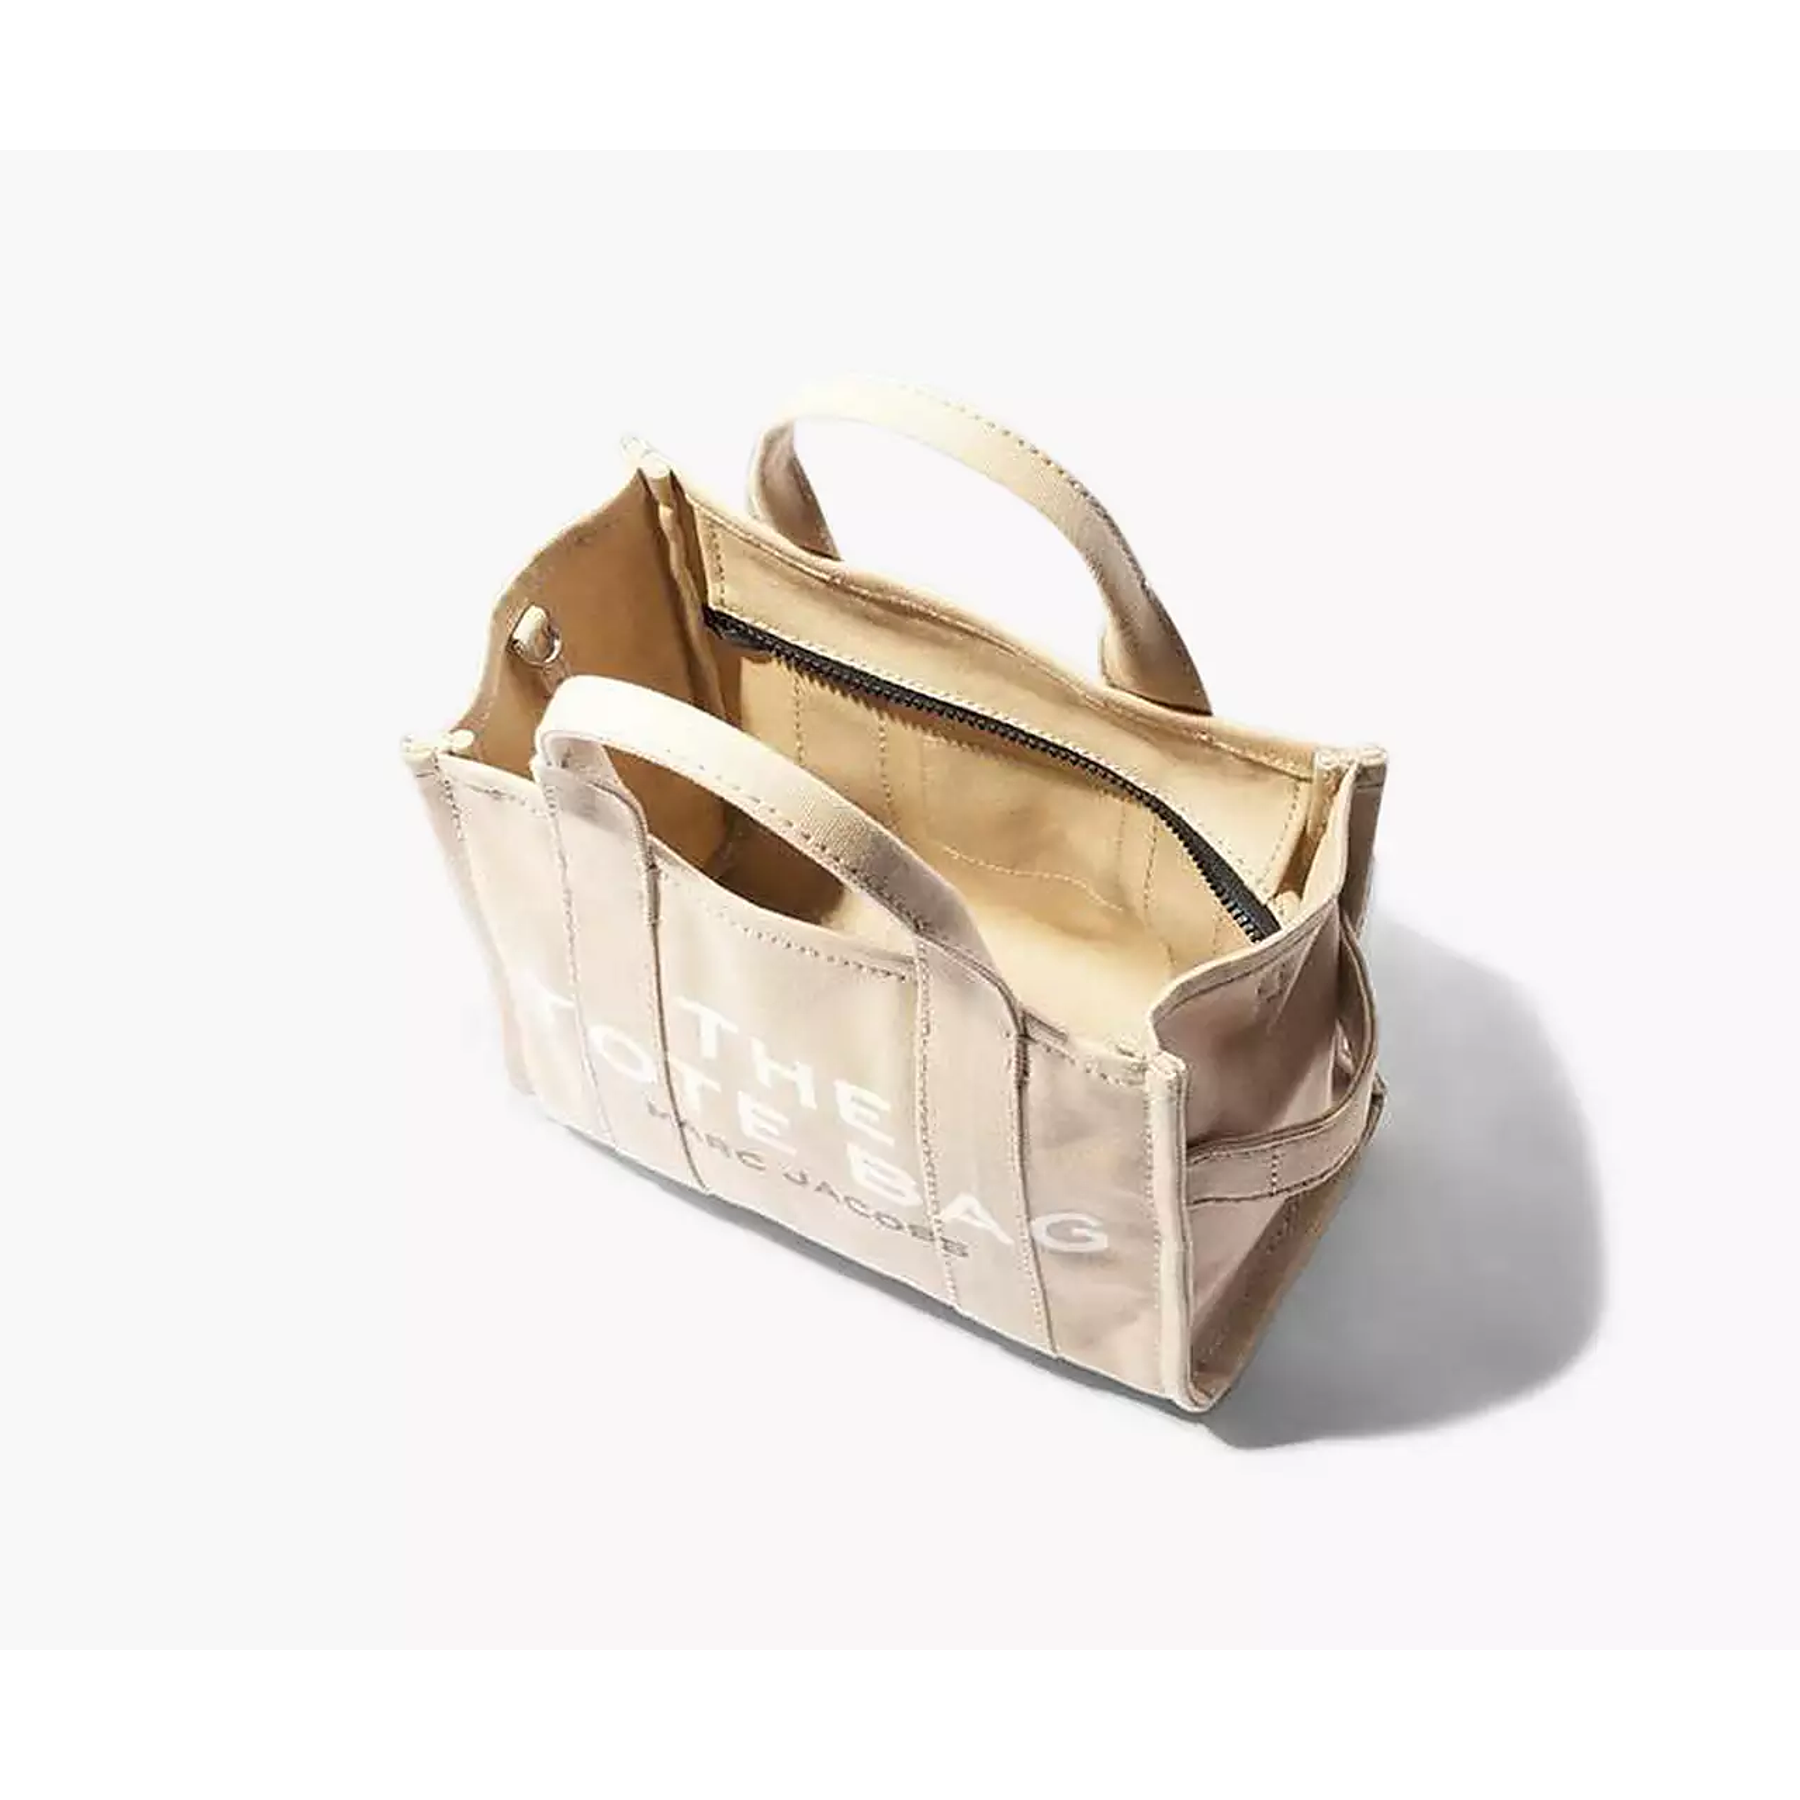 The Tote Bag Small - Beige